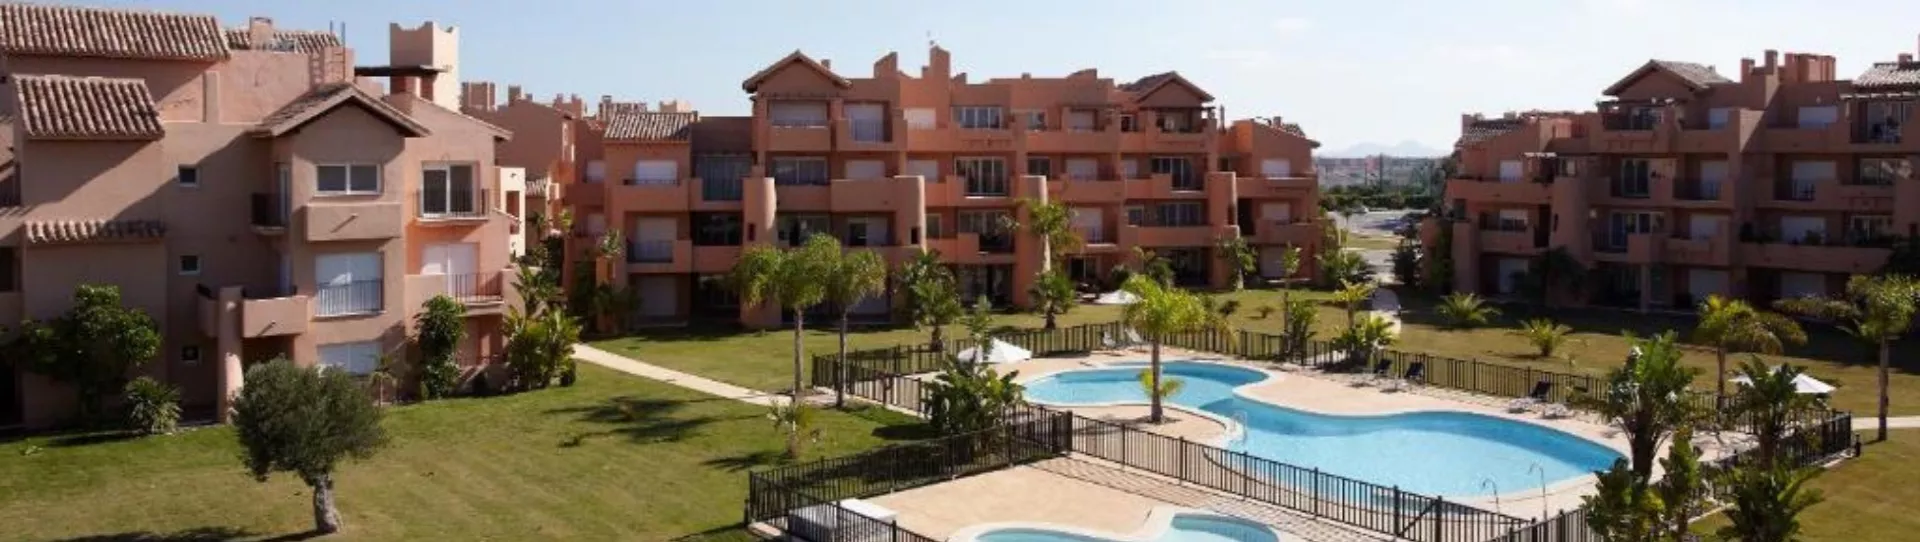 Spain golf holidays - 7 Nights BB & 5 Golf Rounds<br>Groups of 4 - Photo 2